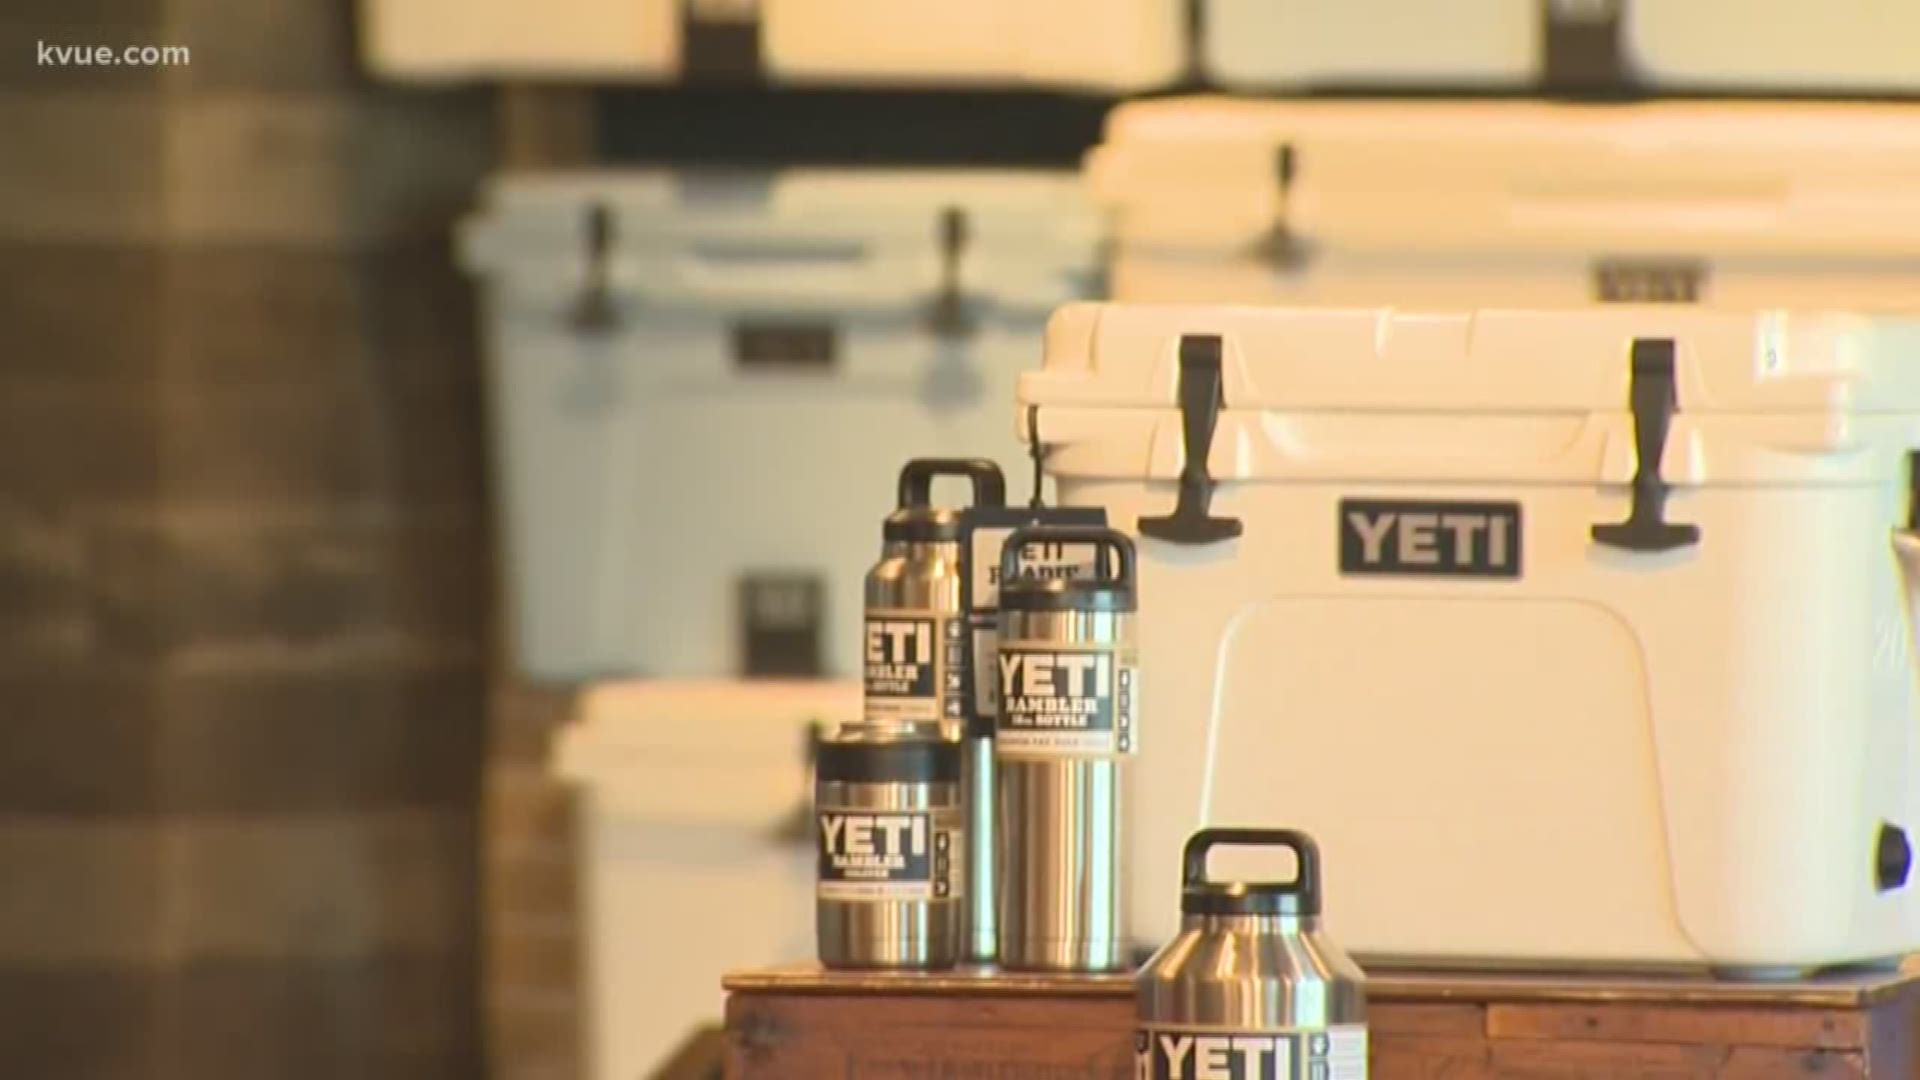 According to a letter released by National Rifle Association president Marion P. Hammer Friday, the Austin-based outdoor company YETI, known for its premium coolers, has abruptly ended business with the NRA. However, a statement released by YETI Monday cl